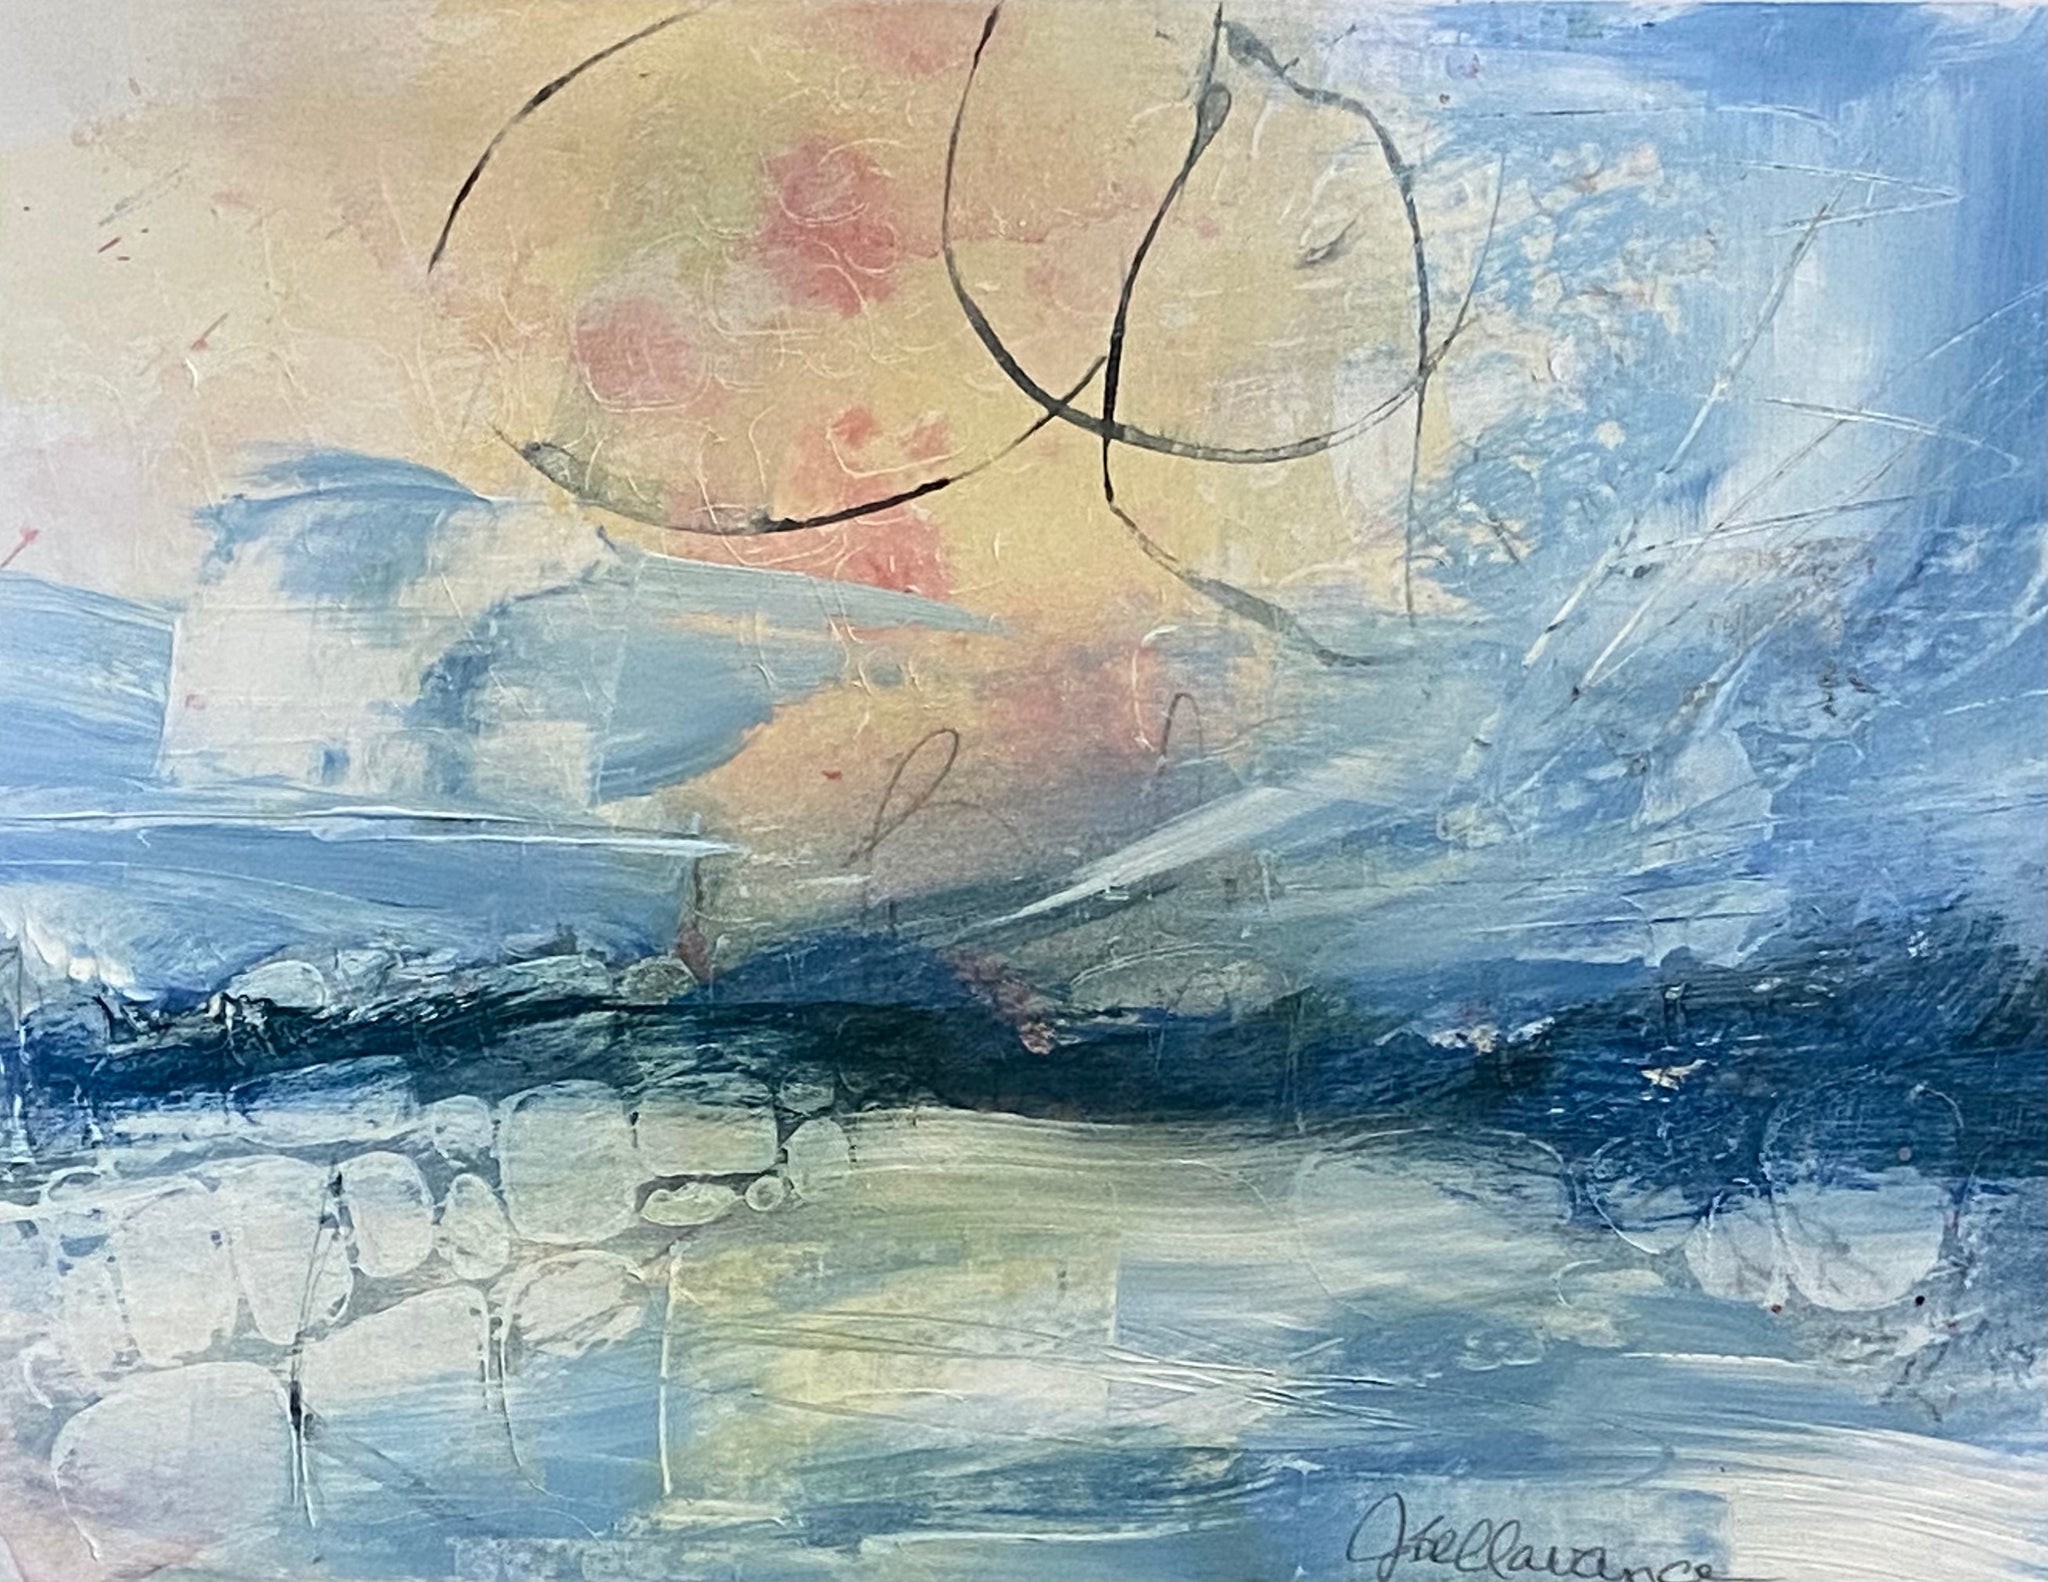 Juanita Bellavance, High winds at sea, 2021, Acrylic on paper, 7 x 9 inches, Unframed